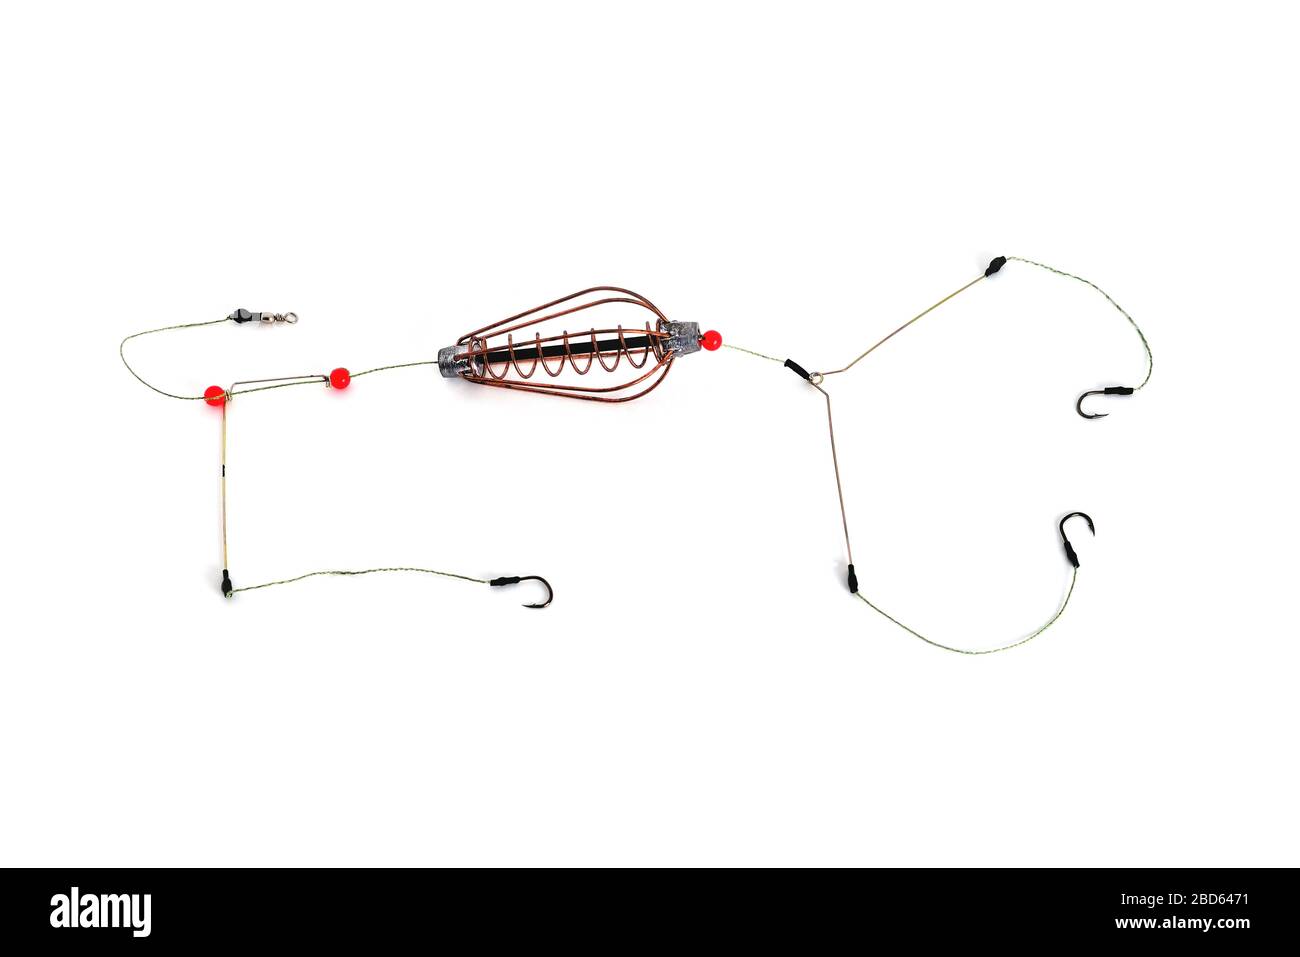 Fishing feeder with accessories on white background. Fishing line, feeder  designed for bottom fishing and different tips of the Stock Photo - Alamy